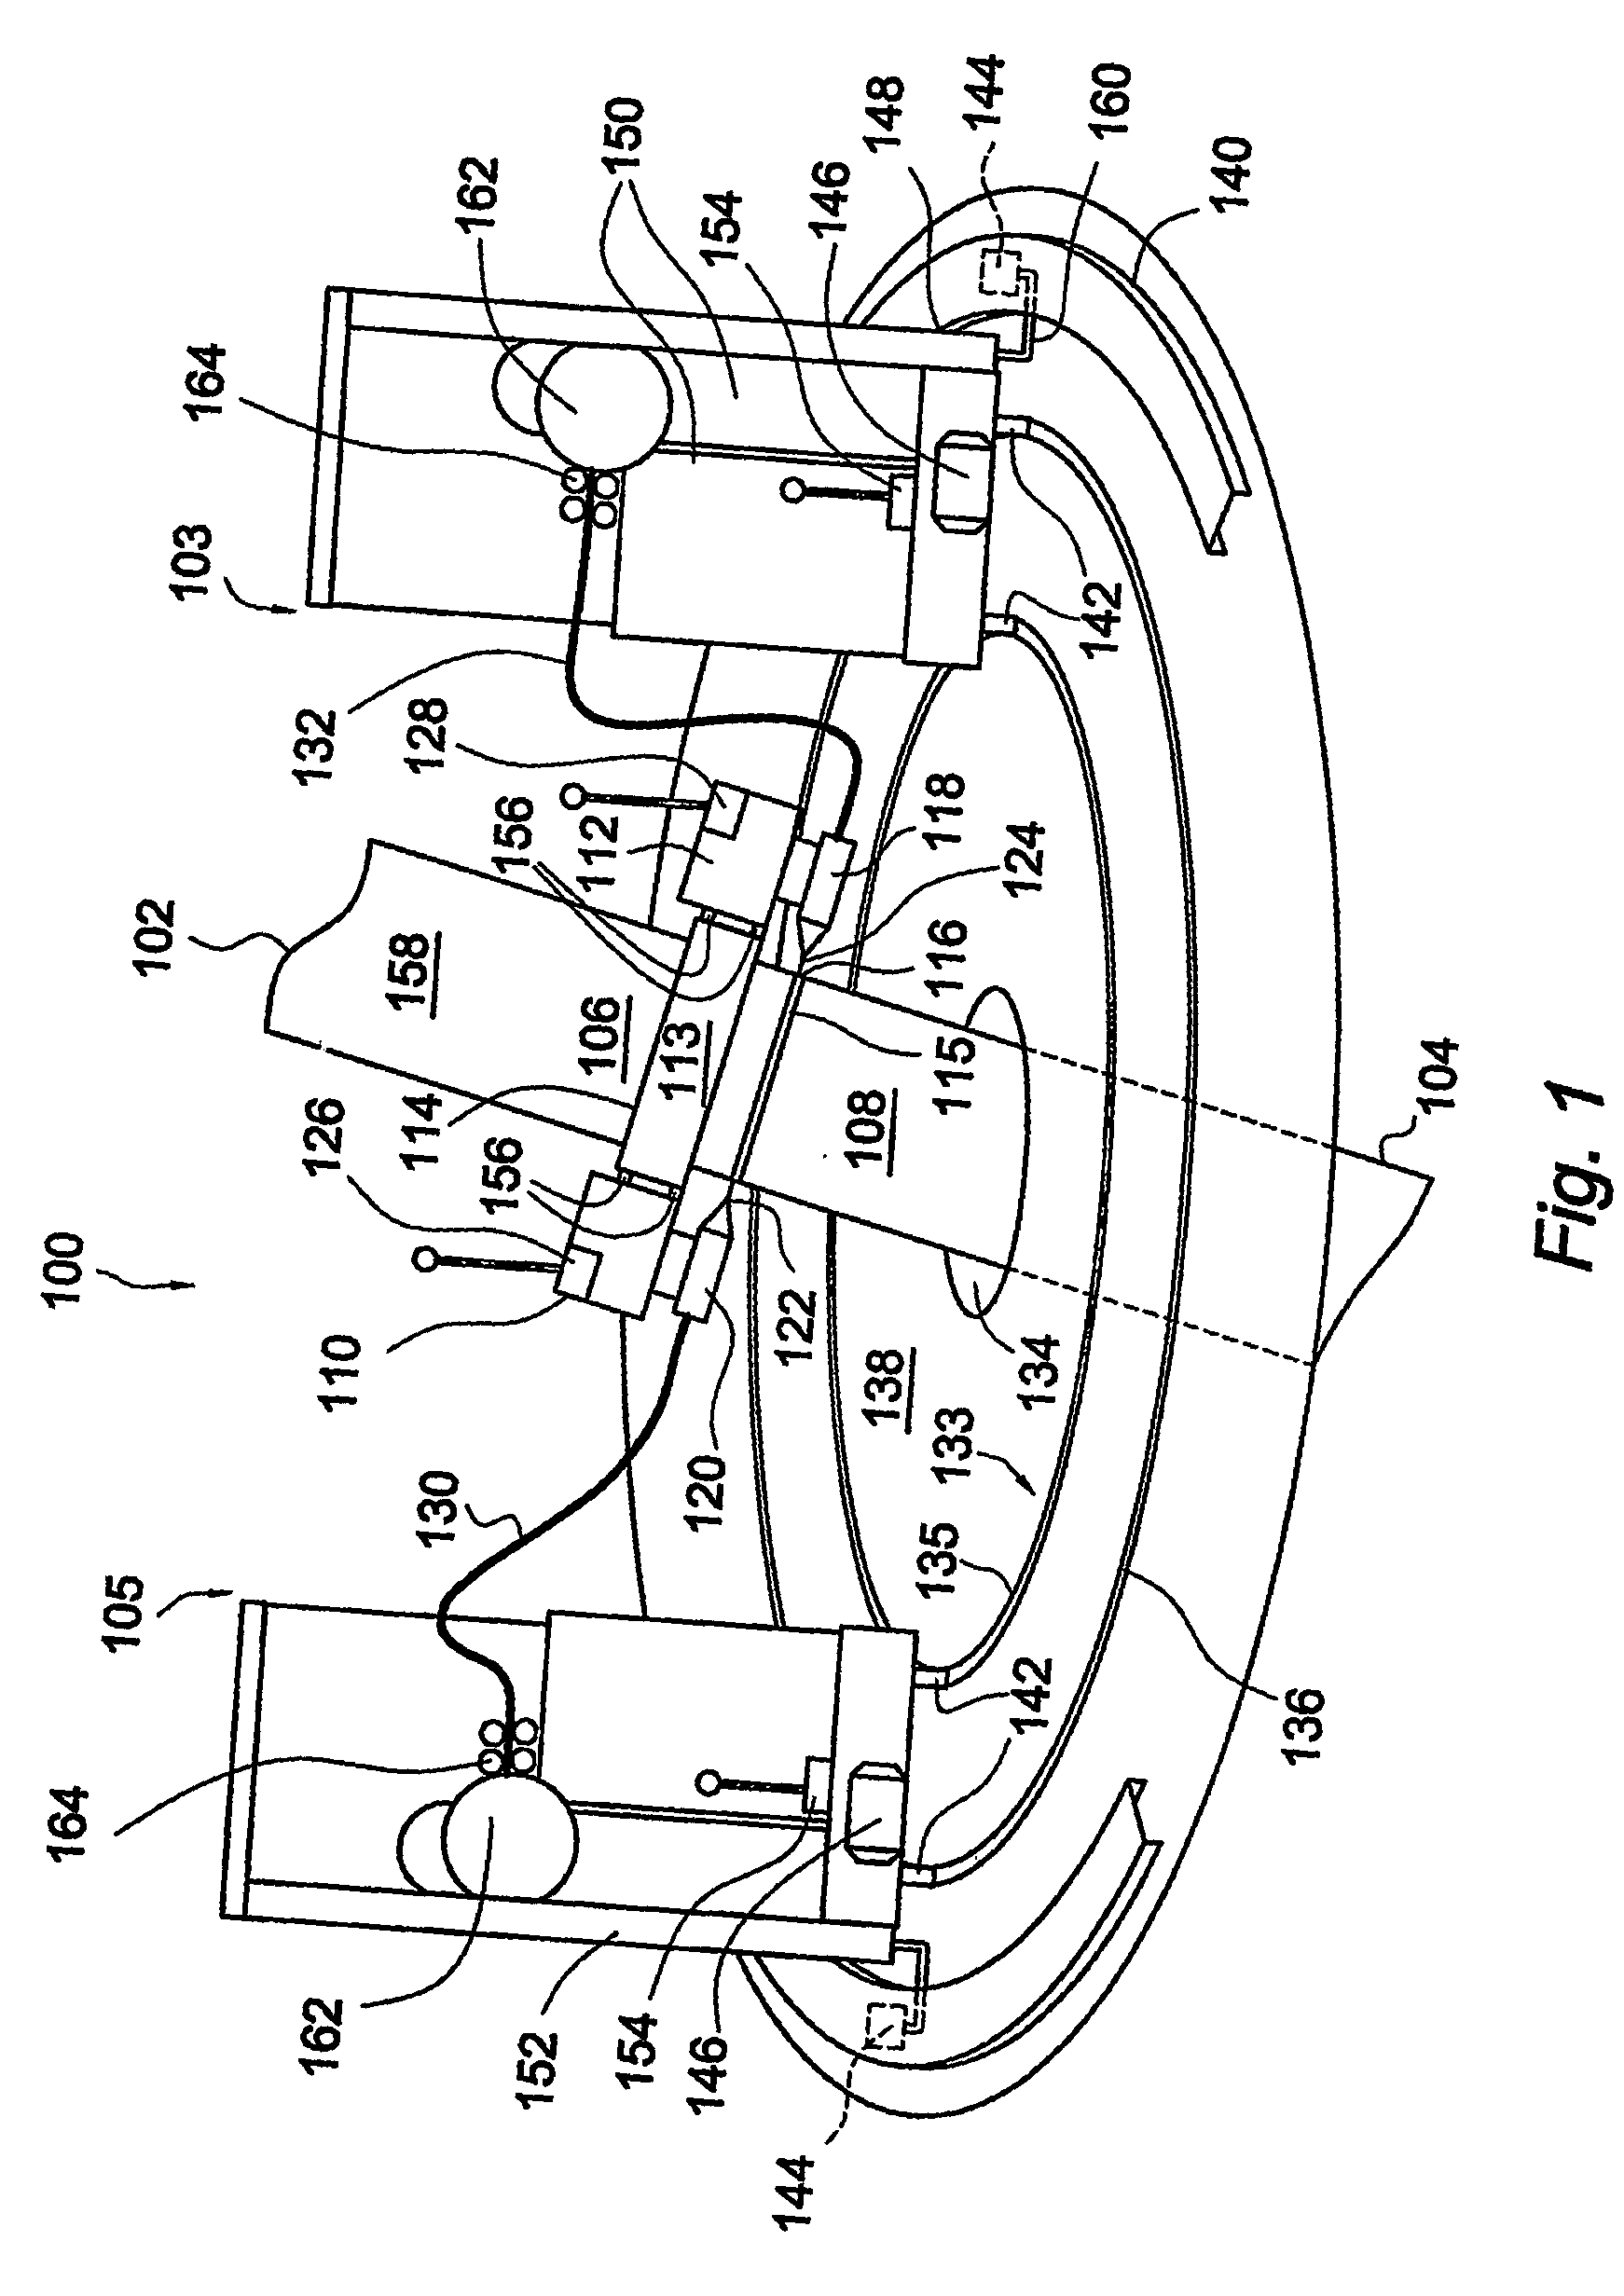 Apparatus and method for joining pipe ends together